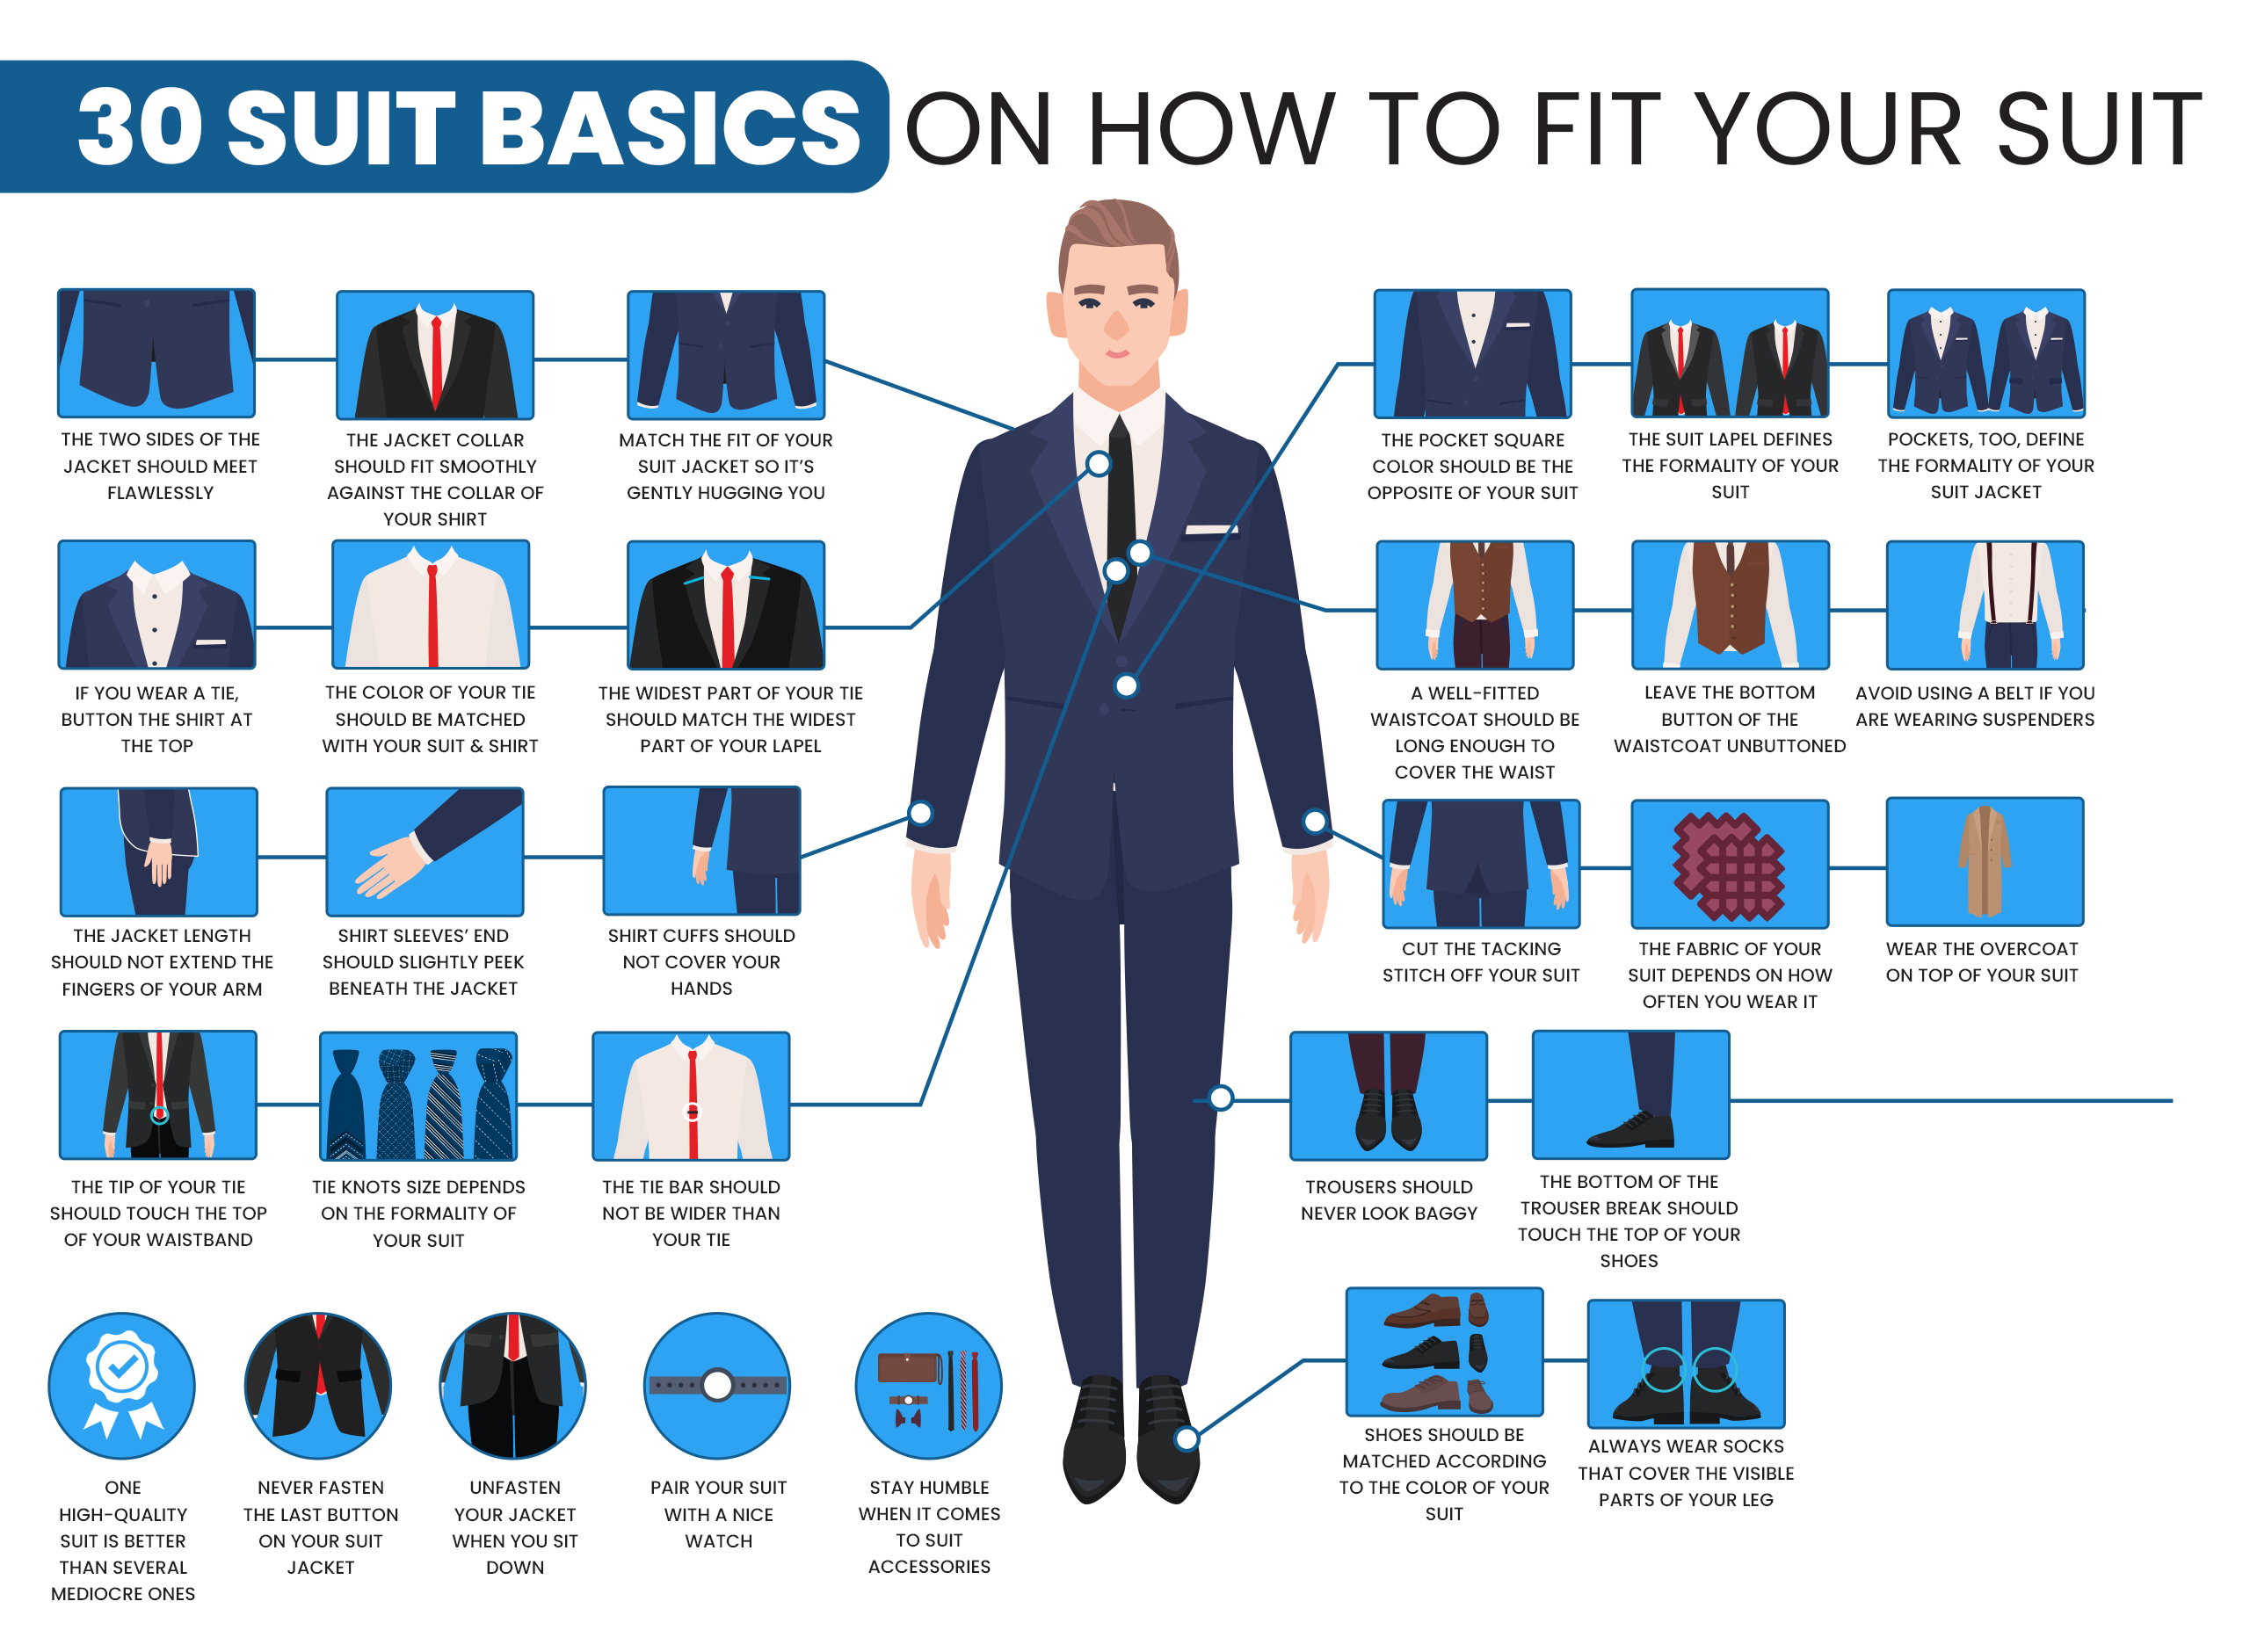 CHOOSING A WEDDING SUIT: A HOW TO GUIDE